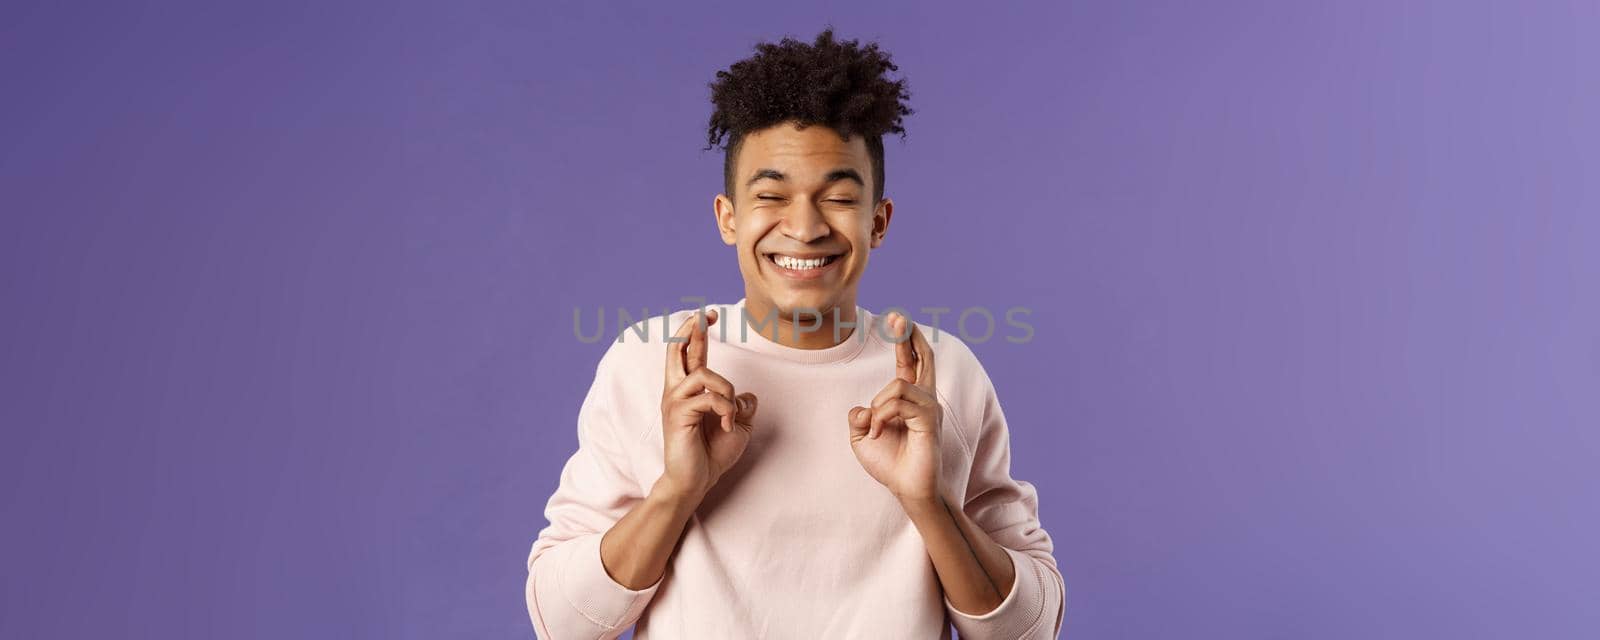 Close-up portrait of happy young hopeful guy anticipating something good happen, cross fingers good luck, close eyes and smiling awaiting miracle, praying for dream come true, purple background.